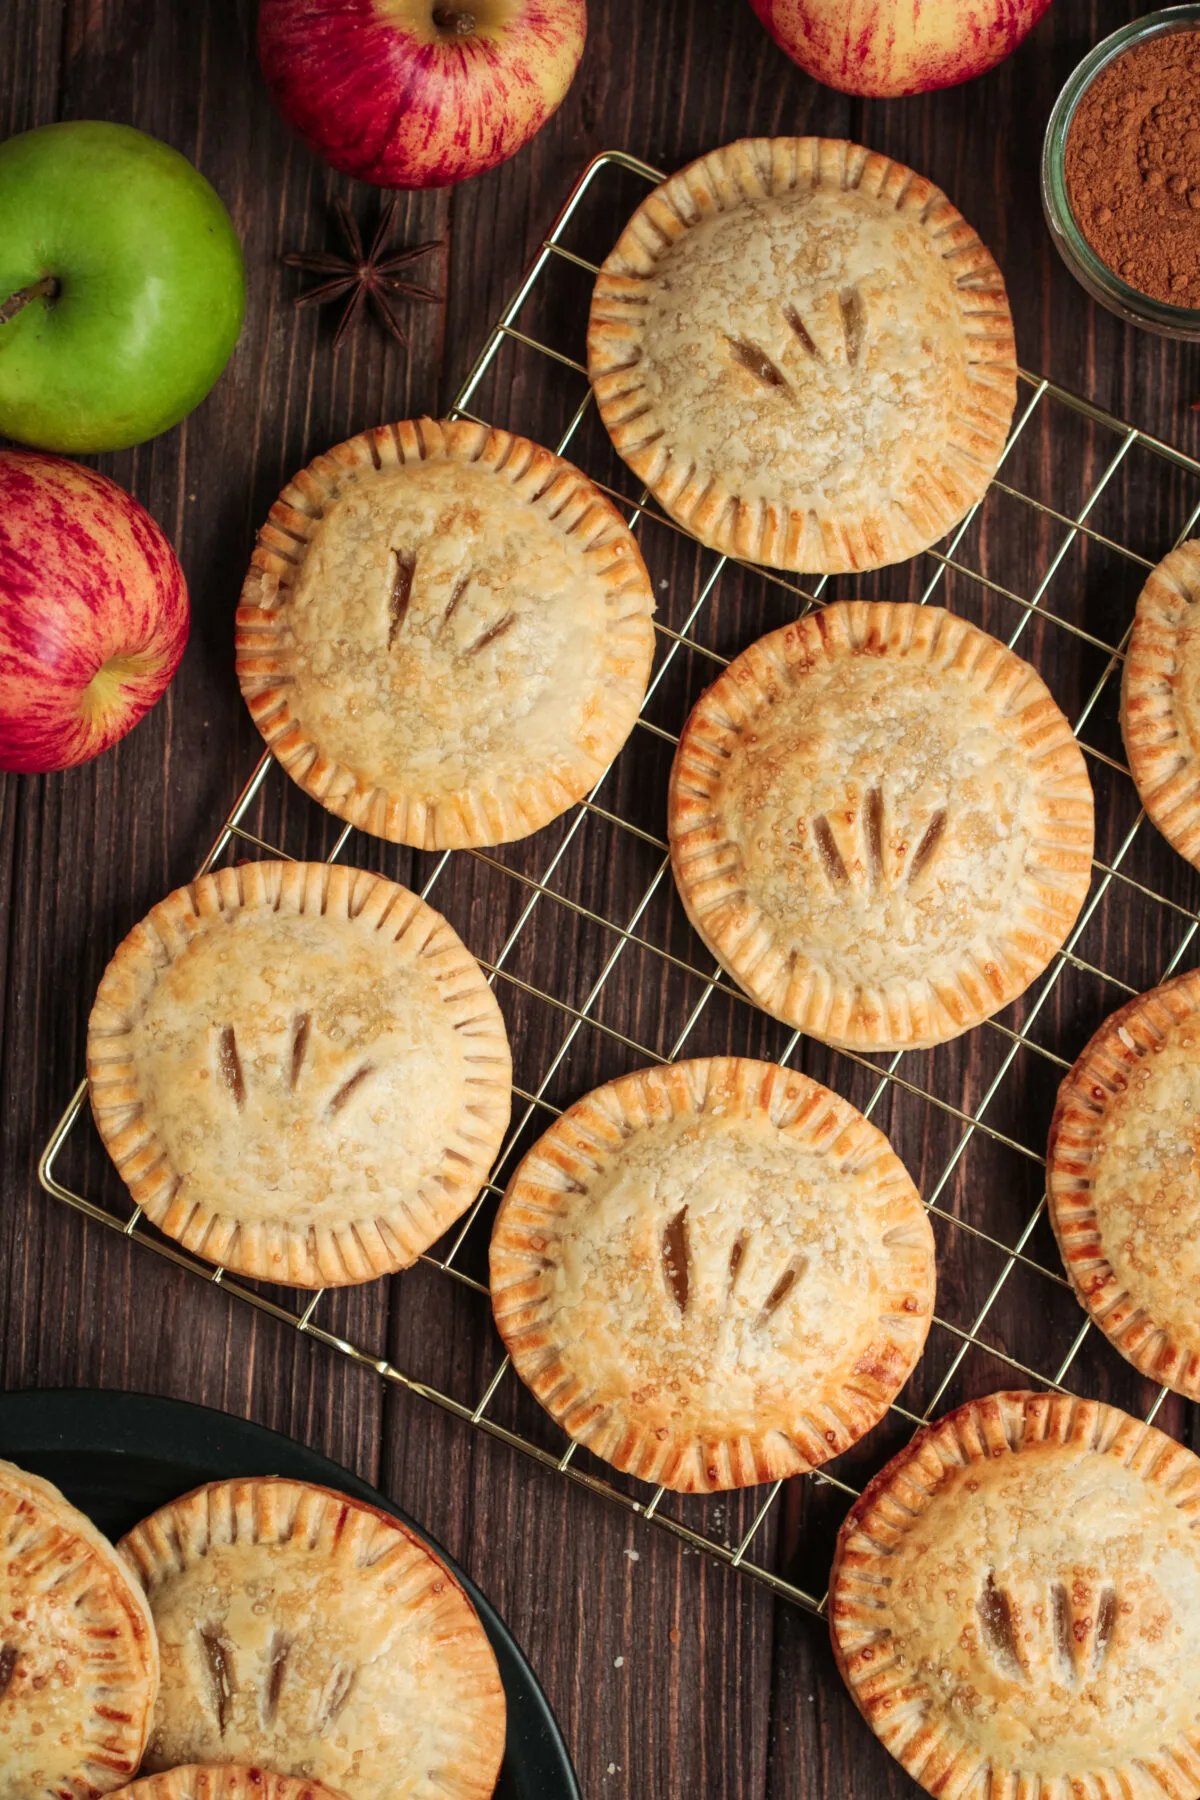 Treat yourself with this delicious apple hand pies recipe that's easy to make. Get ready for the perfect sweet treat that everyone will love!